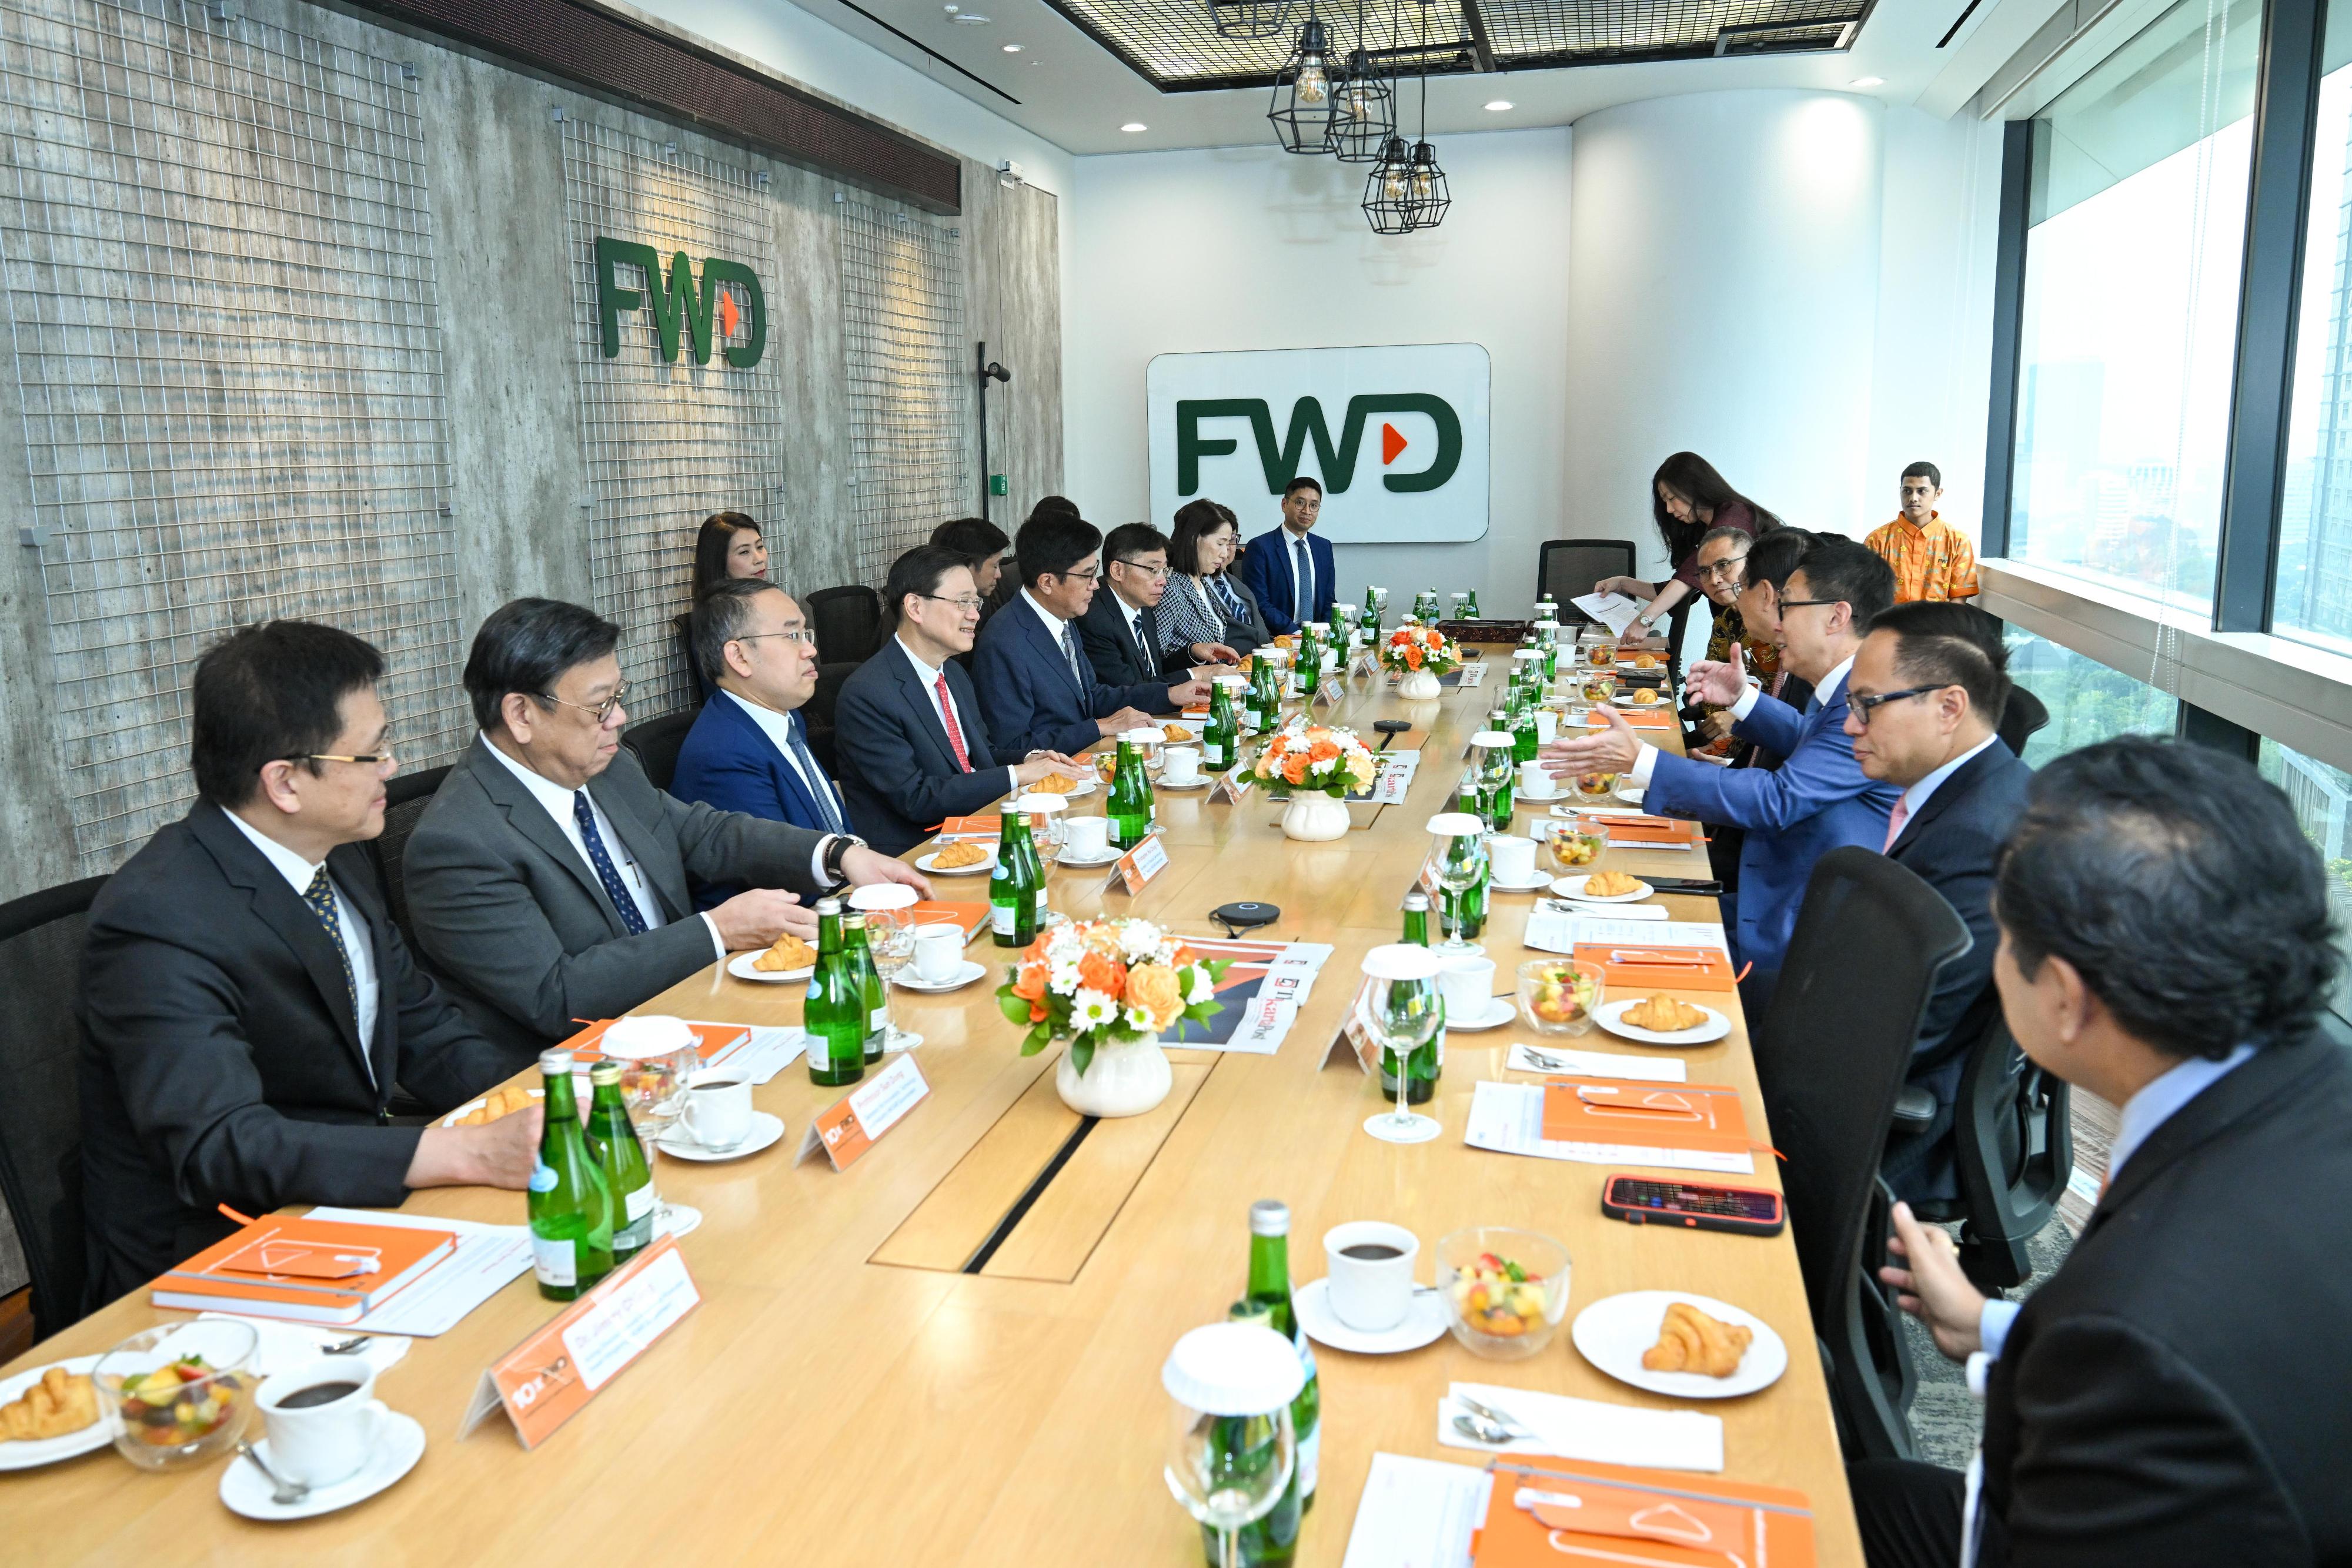 The Chief Executive, Mr John Lee, and a Hong Kong Special Administrative Region delegation visited the local office of a Hong Kong insurance company, FWD Group, in Jakarta, Indonesia today (July 26). Photo shows Mr Lee (fourth left); the Deputy Financial Secretary, Mr Michael Wong (fifth left); the Secretary for Financial Services and the Treasury, Mr Christopher Hui (third left); the Secretary for Commerce and Economic Development, Mr Algernon Yau (second left); and the Secretary for Transport and Logistics, Mr Lam Sai-hung (sixth left), meeting with the Chairman of Pacific Century Group, Mr Richard Li (third right), and representatives of the company.